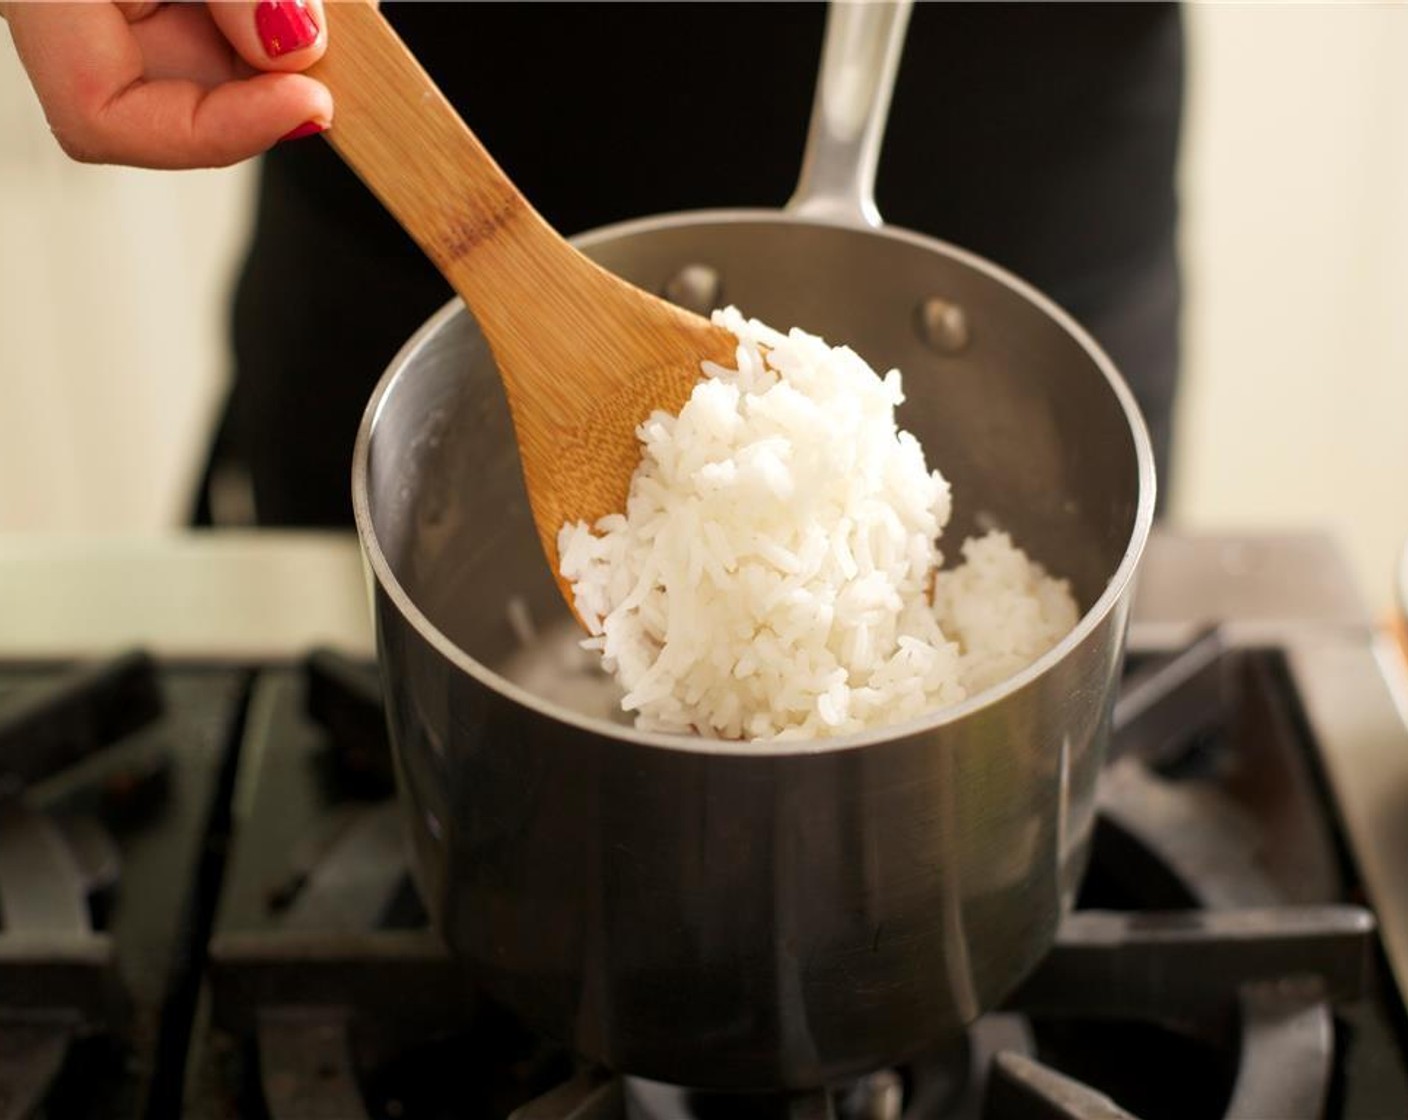 step 3 In a medium saucepan, add 1 cup of water and the Jasmine Rice (2/3 cup) and bring to a boil over medium high heat. Stir once, then cover and reduce heat to low and simmer for 10 minutes. Remove from heat, fluff rice and hold until plating.